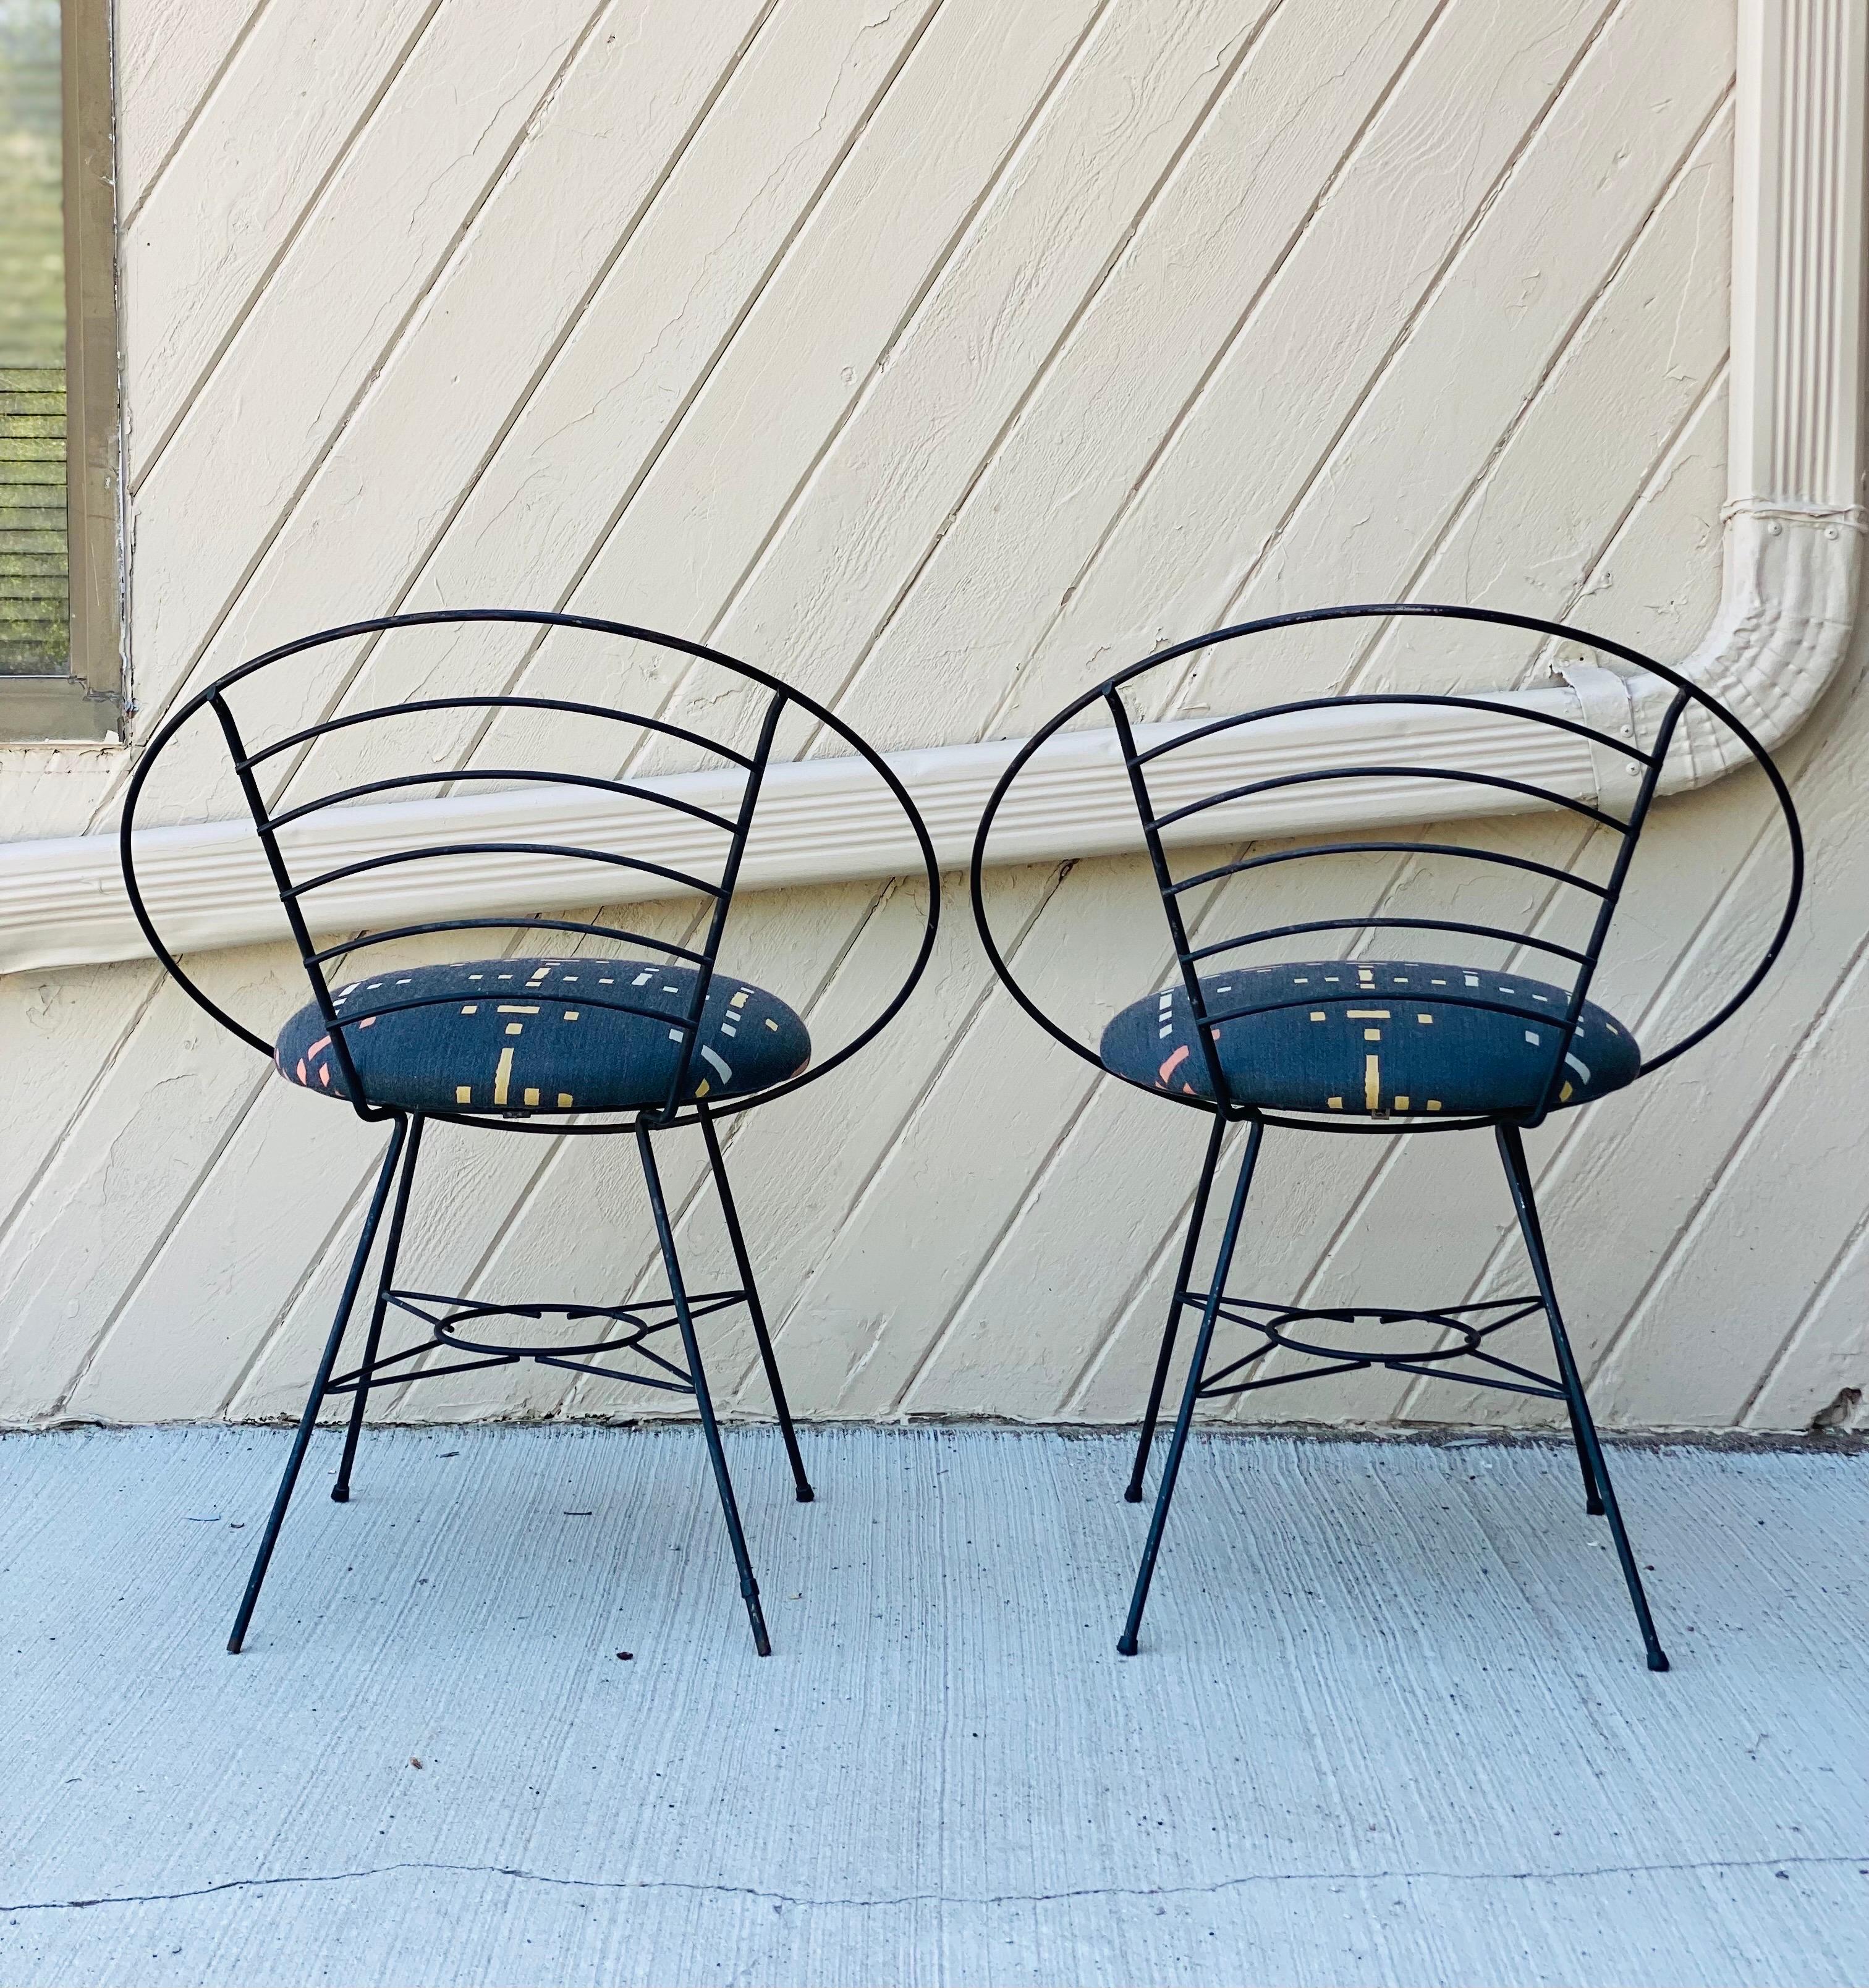 1970s Wrought Black Iron Atomic Hoop Chairs, a Pair In Good Condition For Sale In Farmington Hills, MI